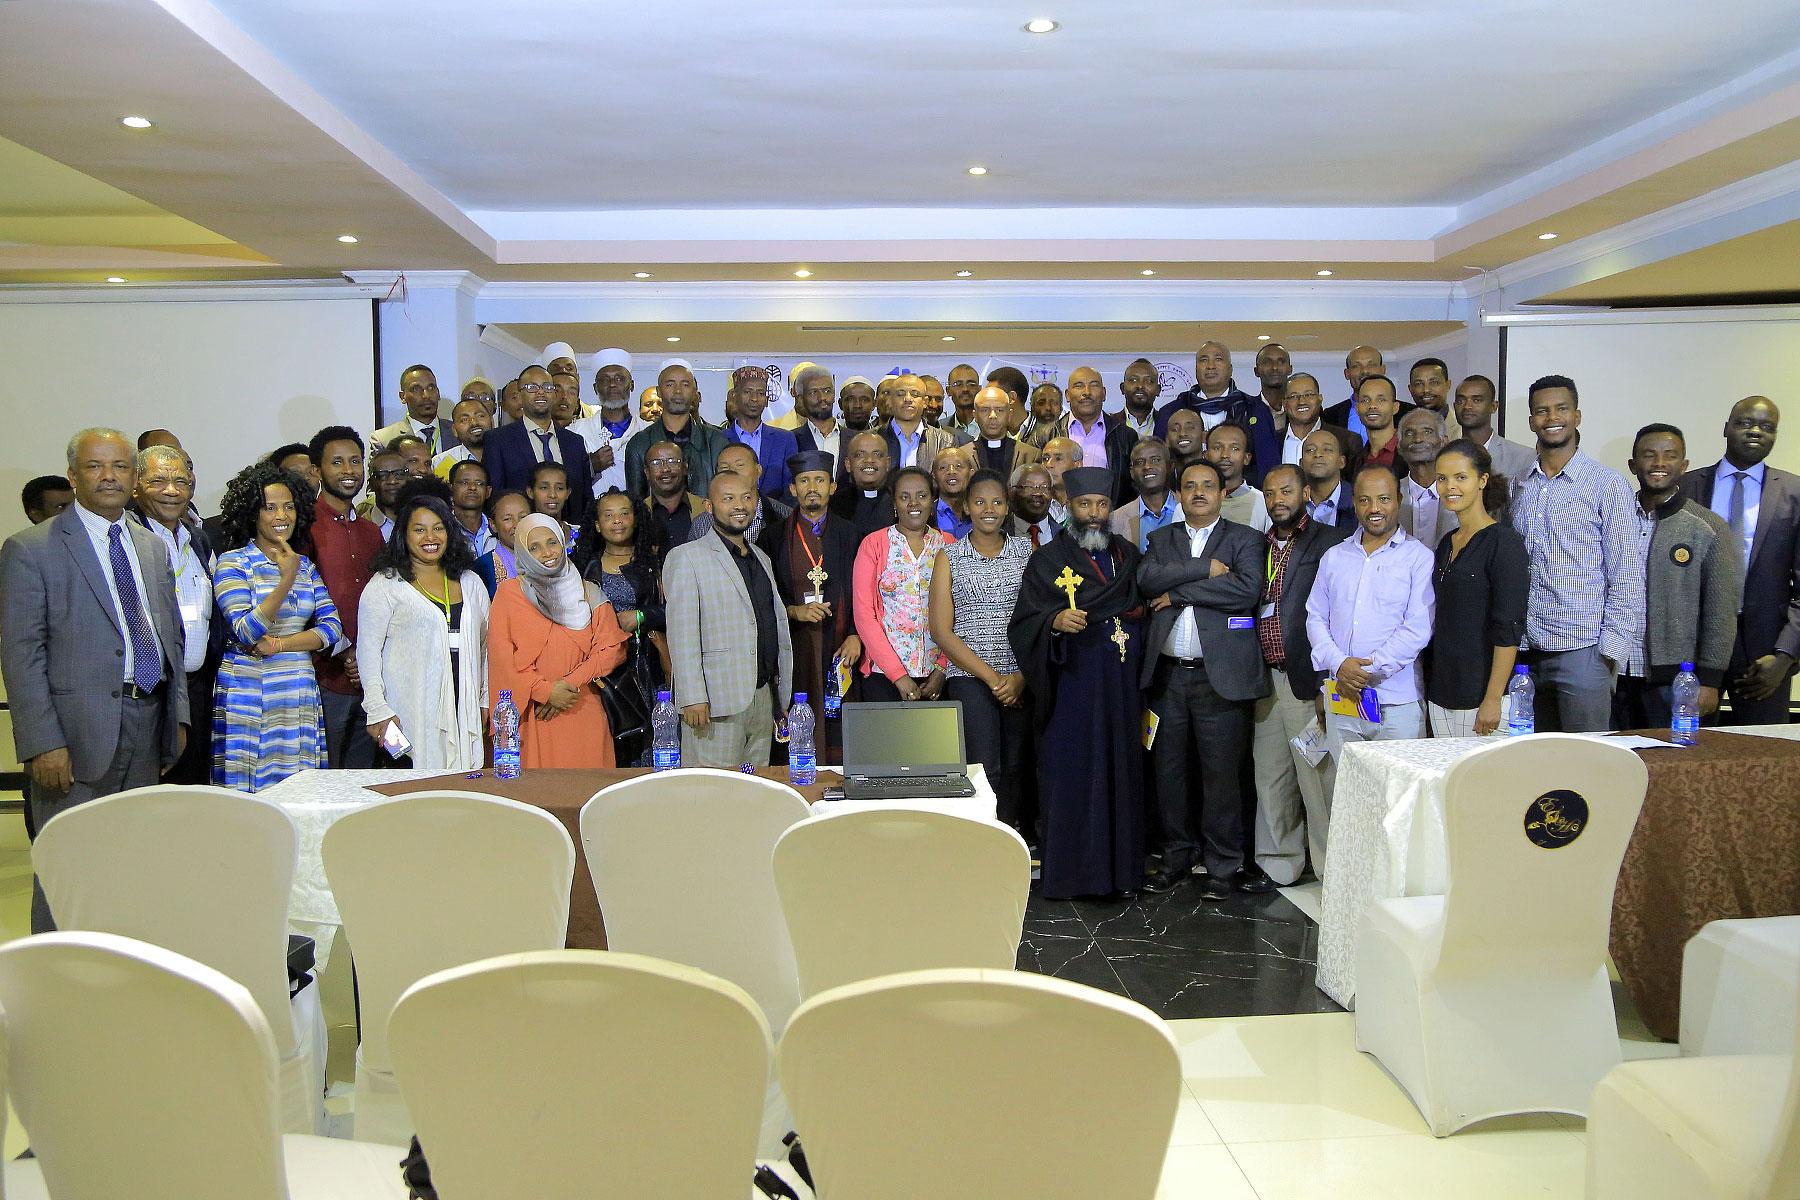 Participants during the October 2018 training of trainersâ workshop in Ethiopiaâs capital Addis Ababa. On the far left, front row, is former EECMY president, Rev. Dr Wakseyoum Idosa, who coordinates the peace project. Photo: EECMY